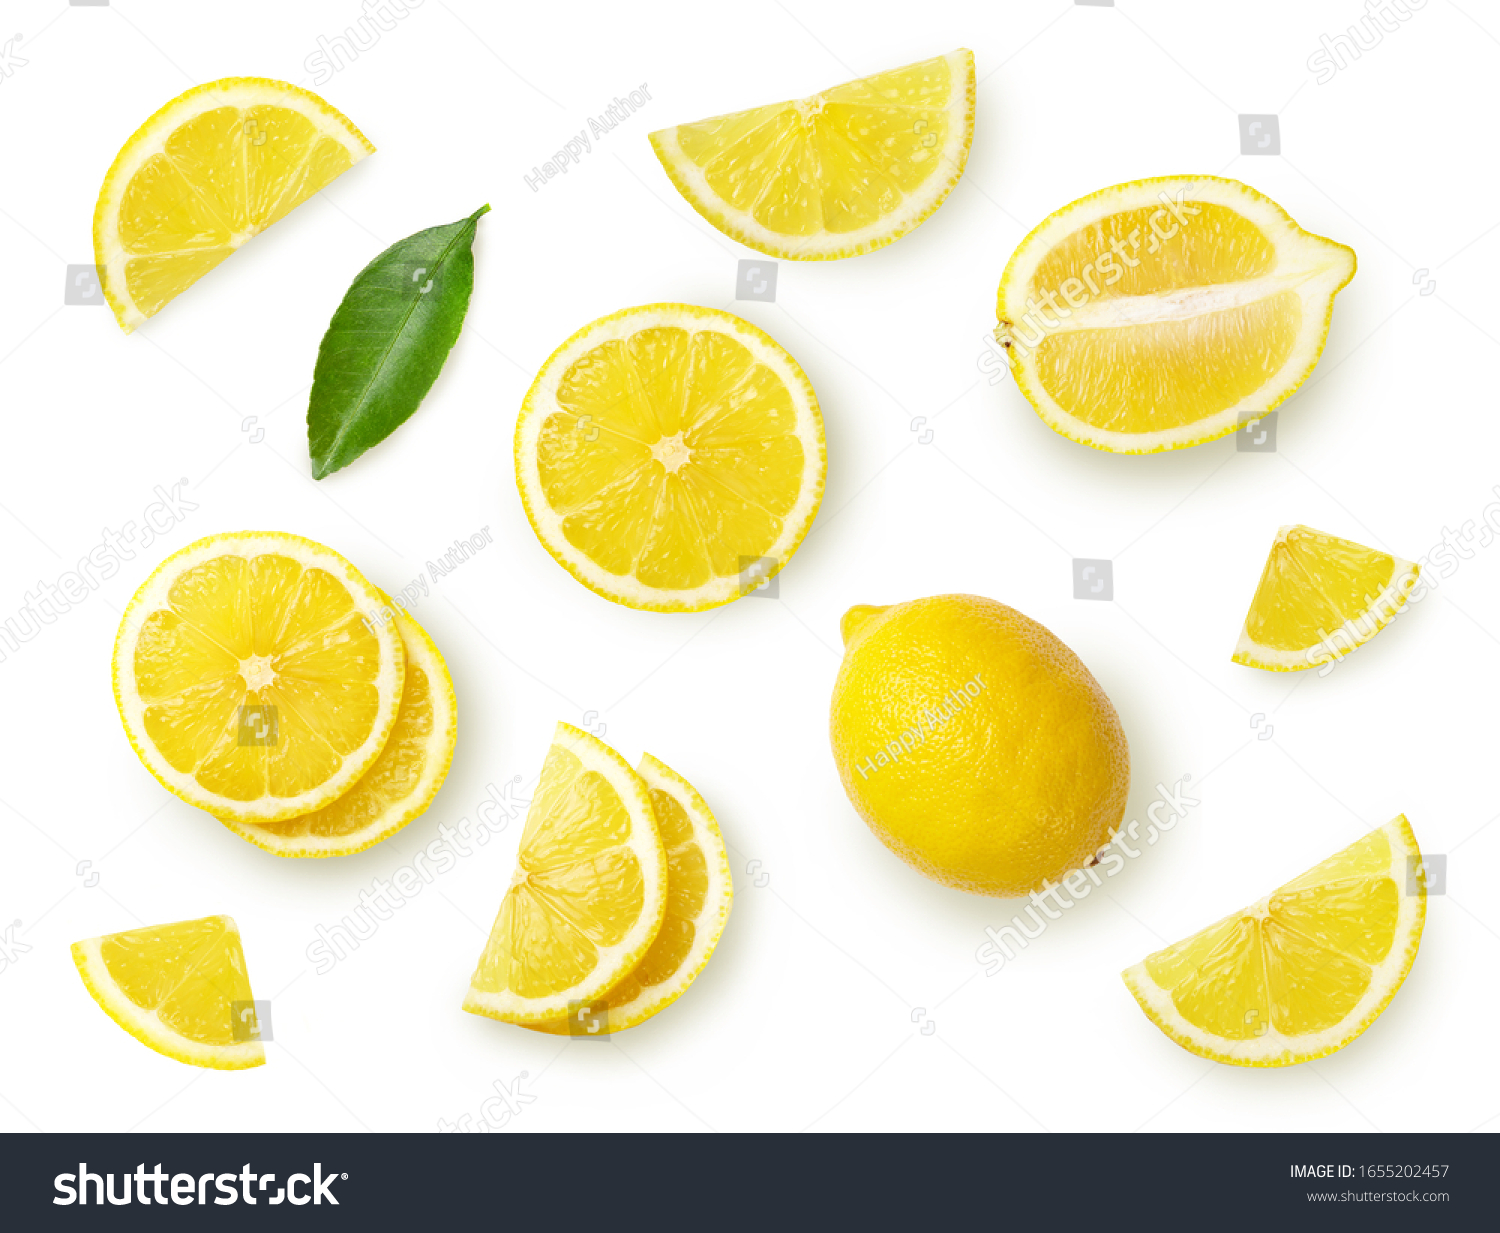 A set of sliced lemon isolated on white background. Top view. #1655202457